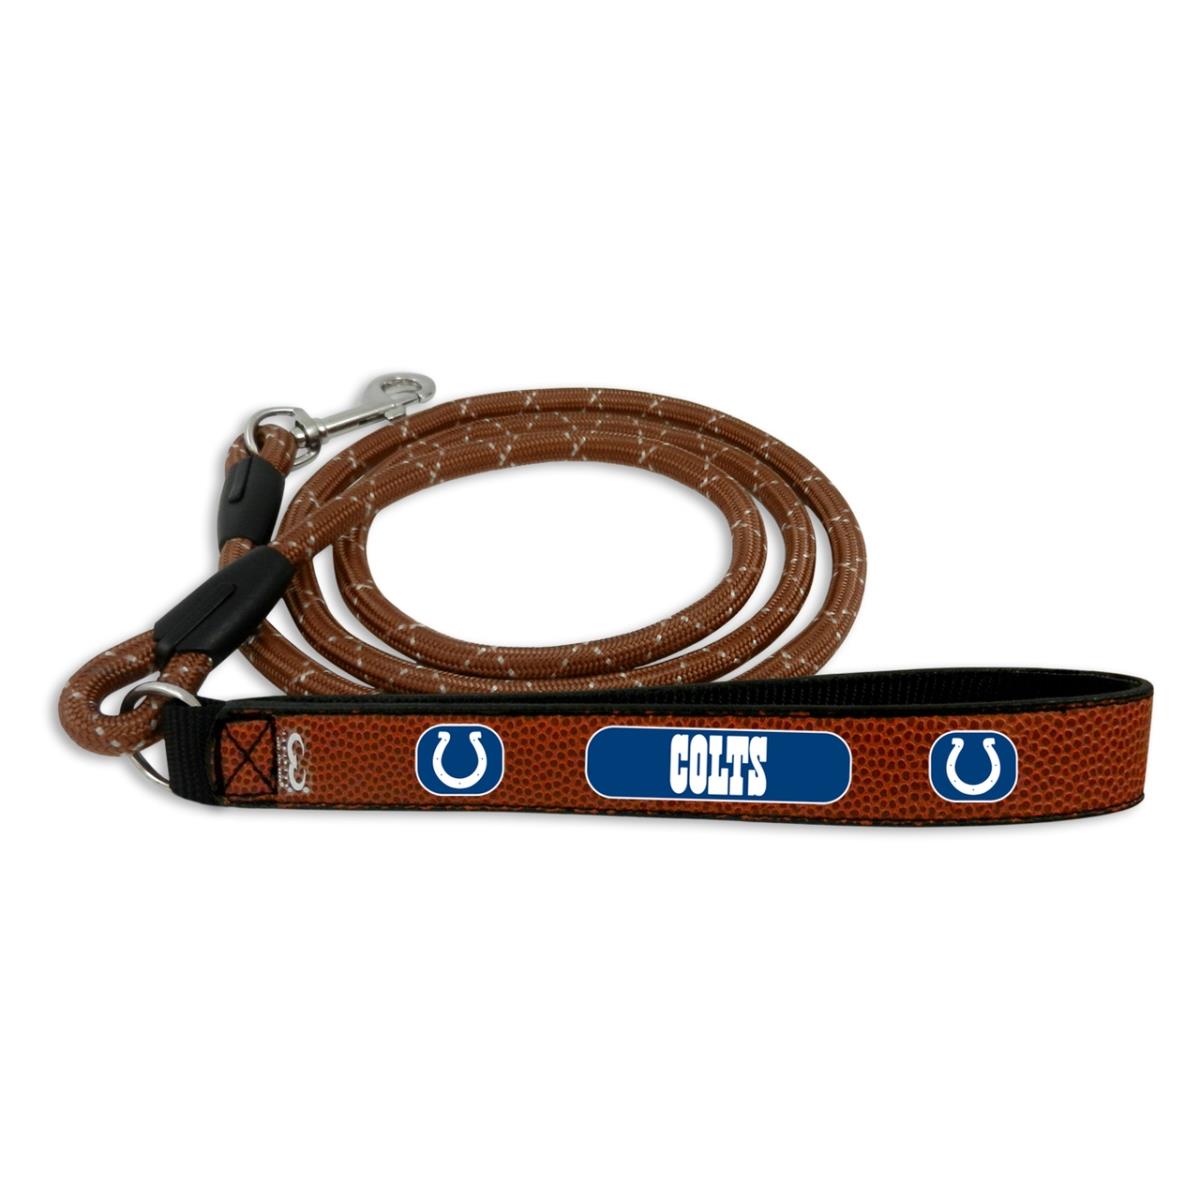 CASEYS Indianapolis Colts Football Leather Leash - L